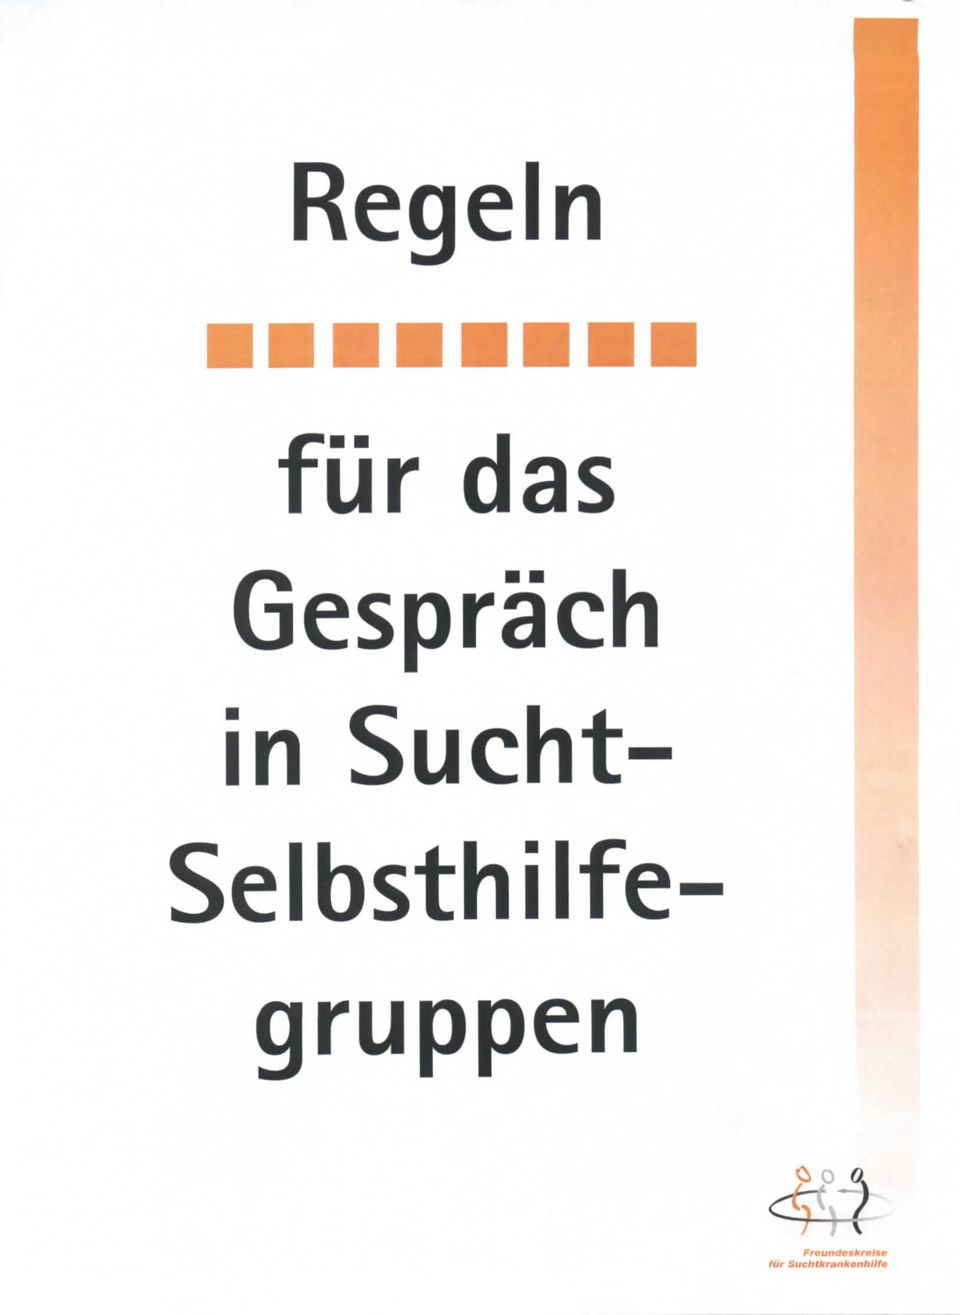 Selbsthilfe gruppen